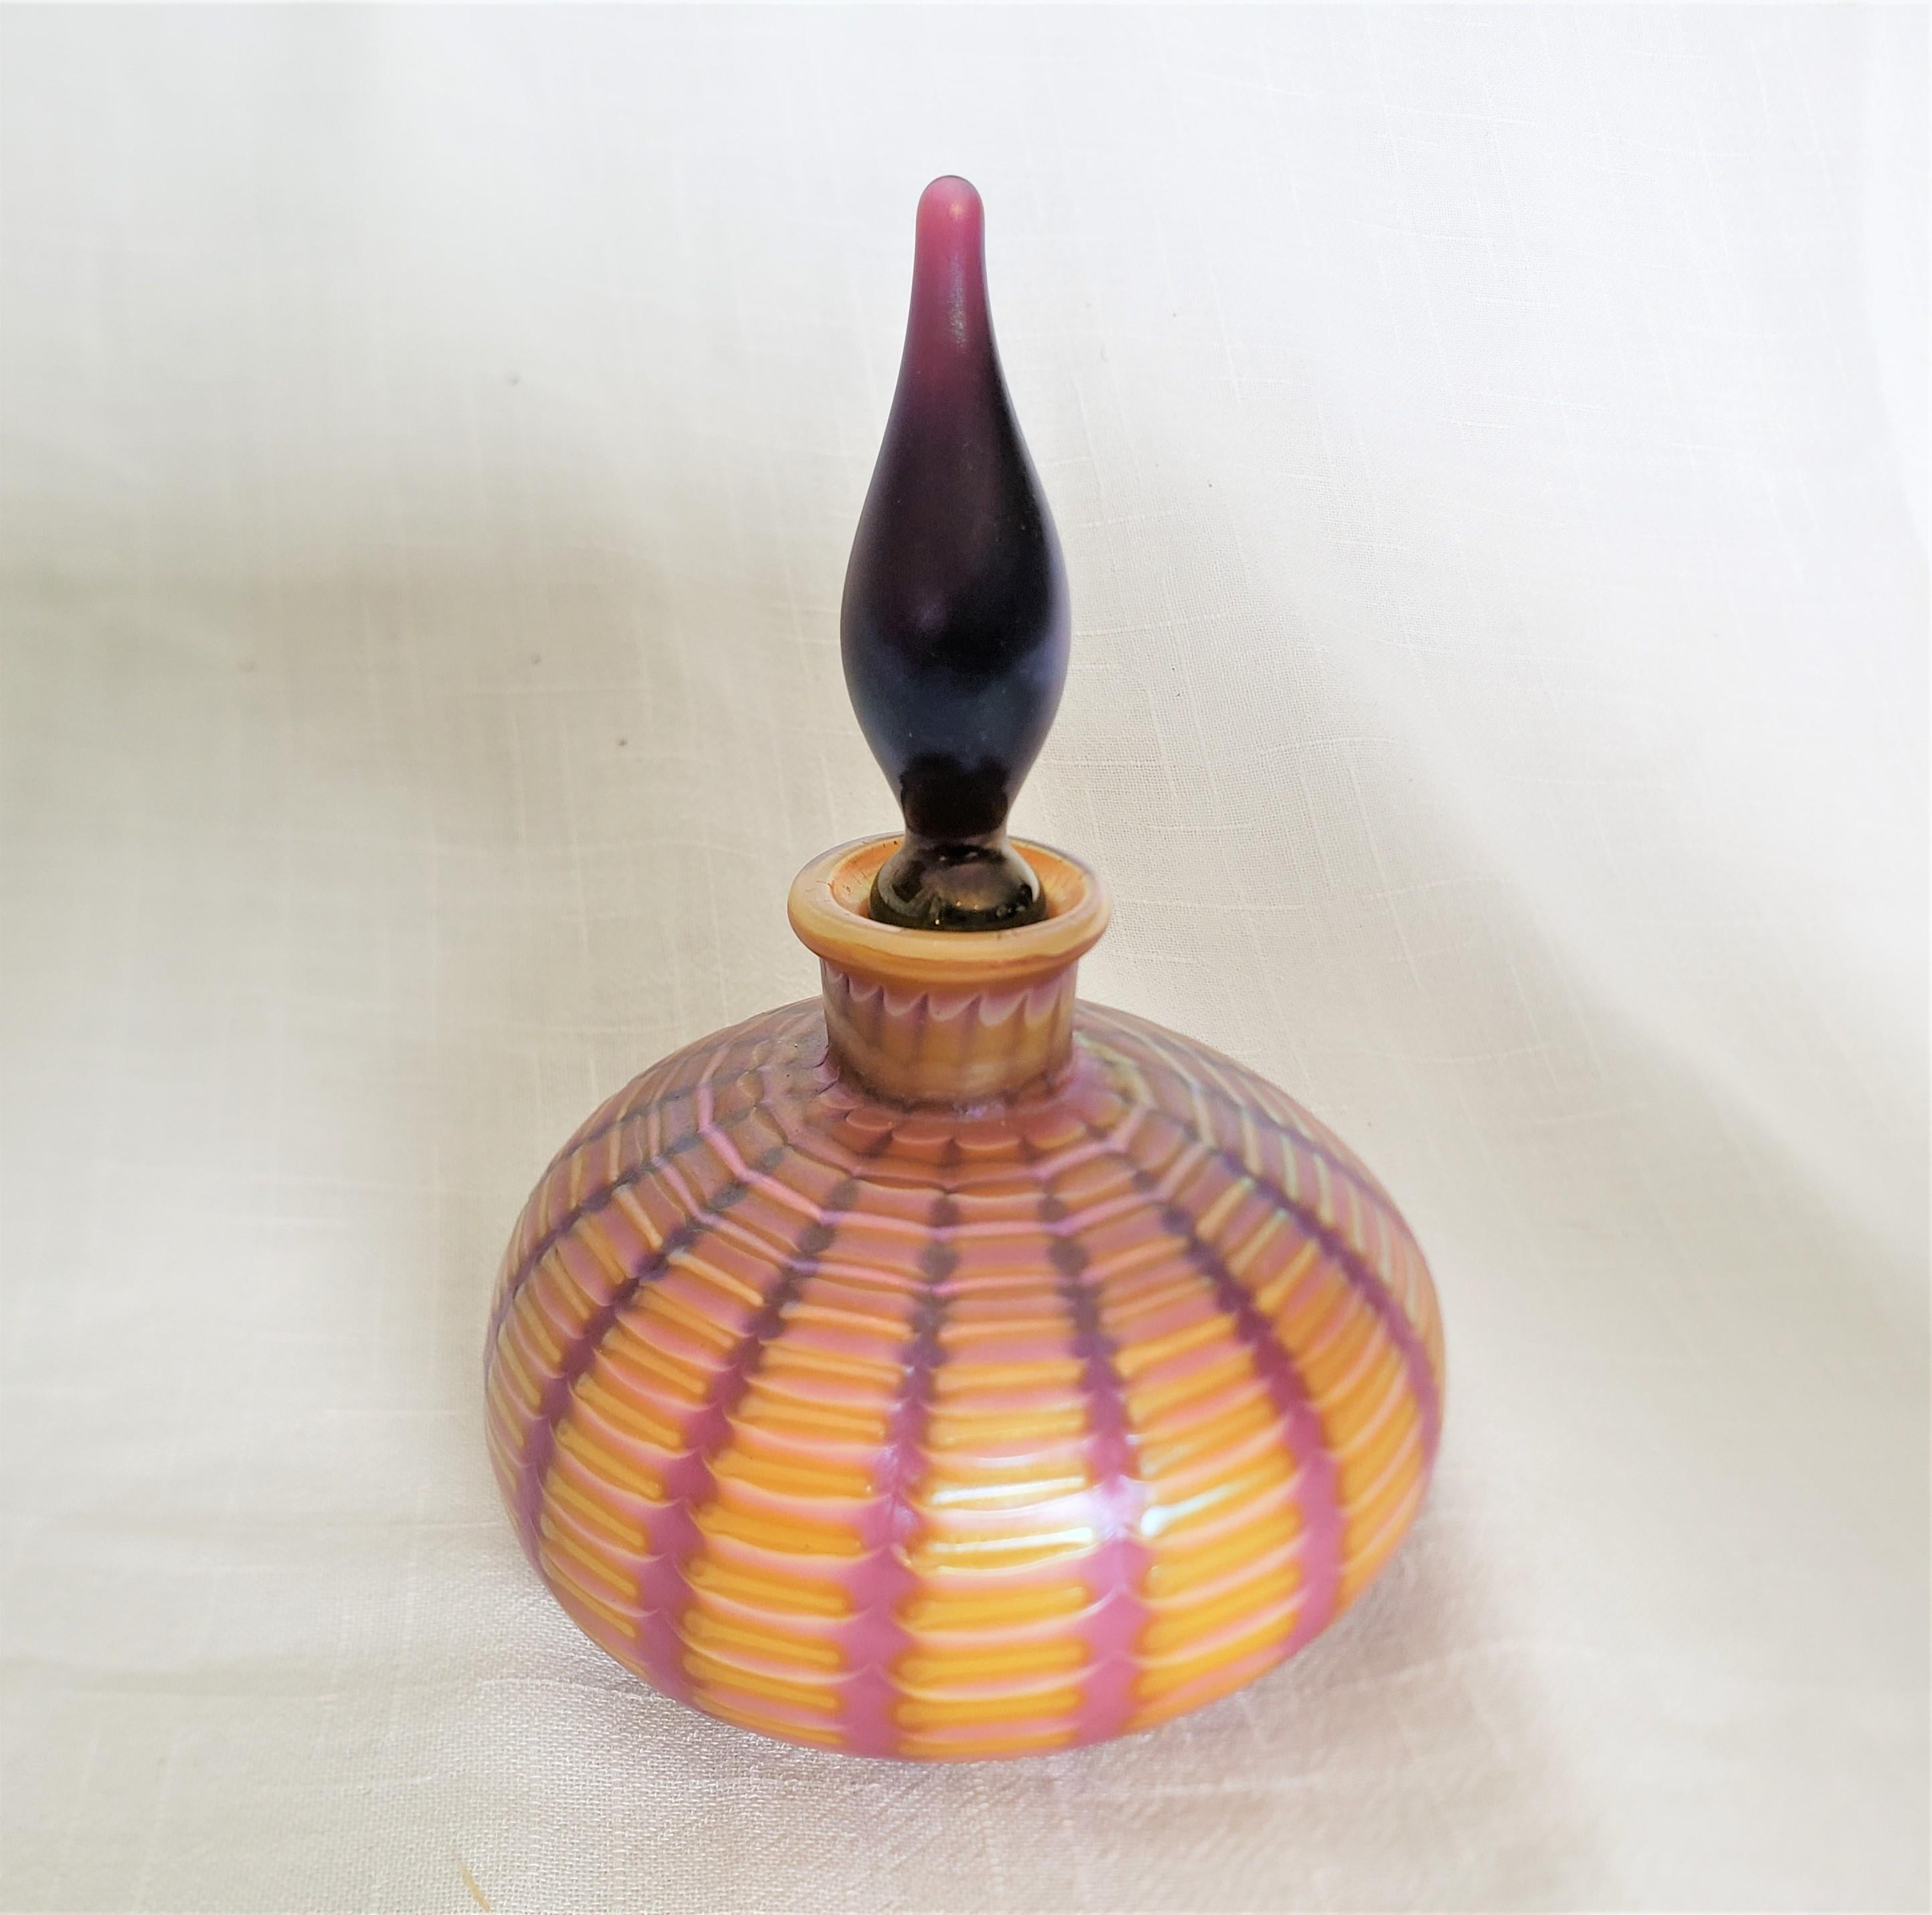 This art glass perfume or scent bottle bears no maker's signature, but is presumed to have originated from the Czech Republic and dates to approximately 1970 and done in an Art Deco style. The bottle is done in a vibrant tangerine orange glass with